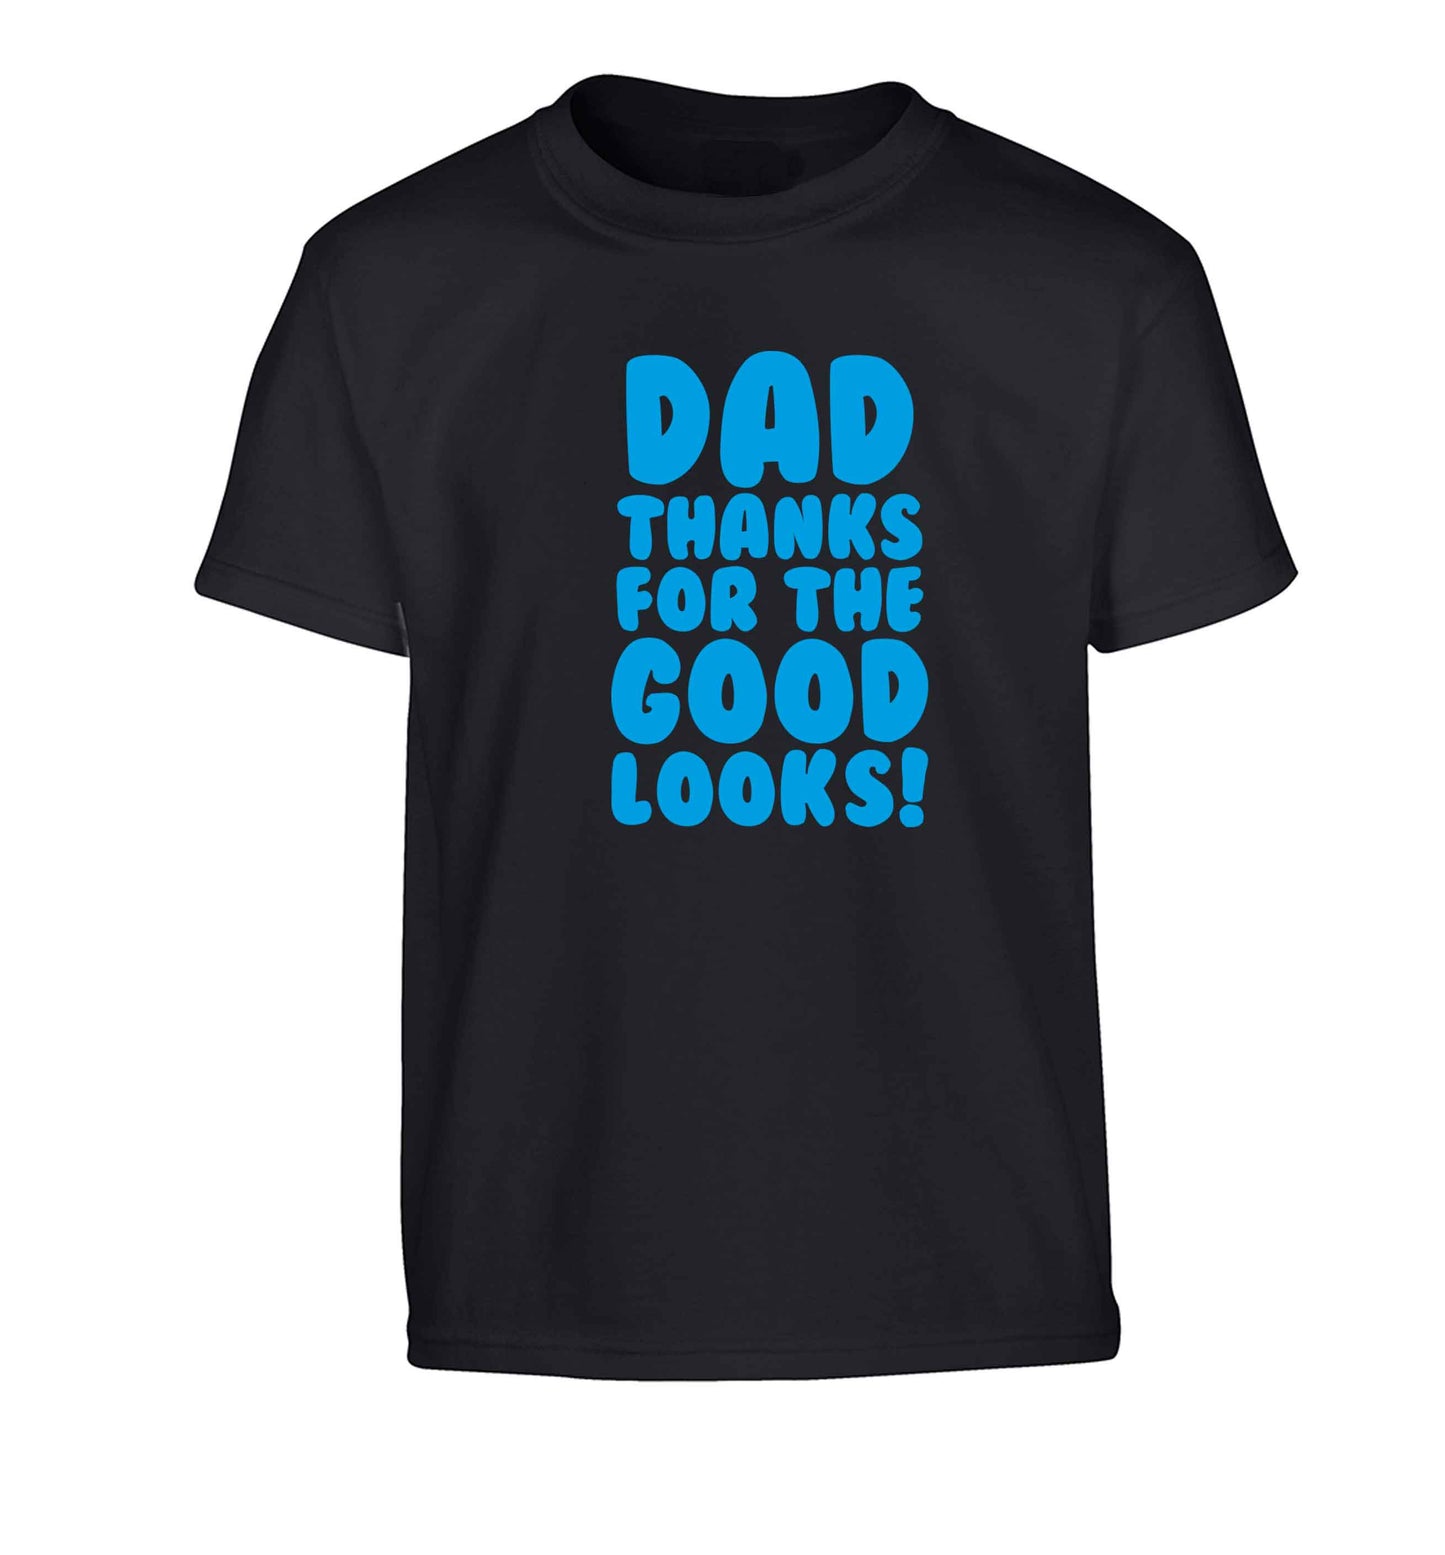 Dad thanks for the good looks Children's black Tshirt 12-13 Years